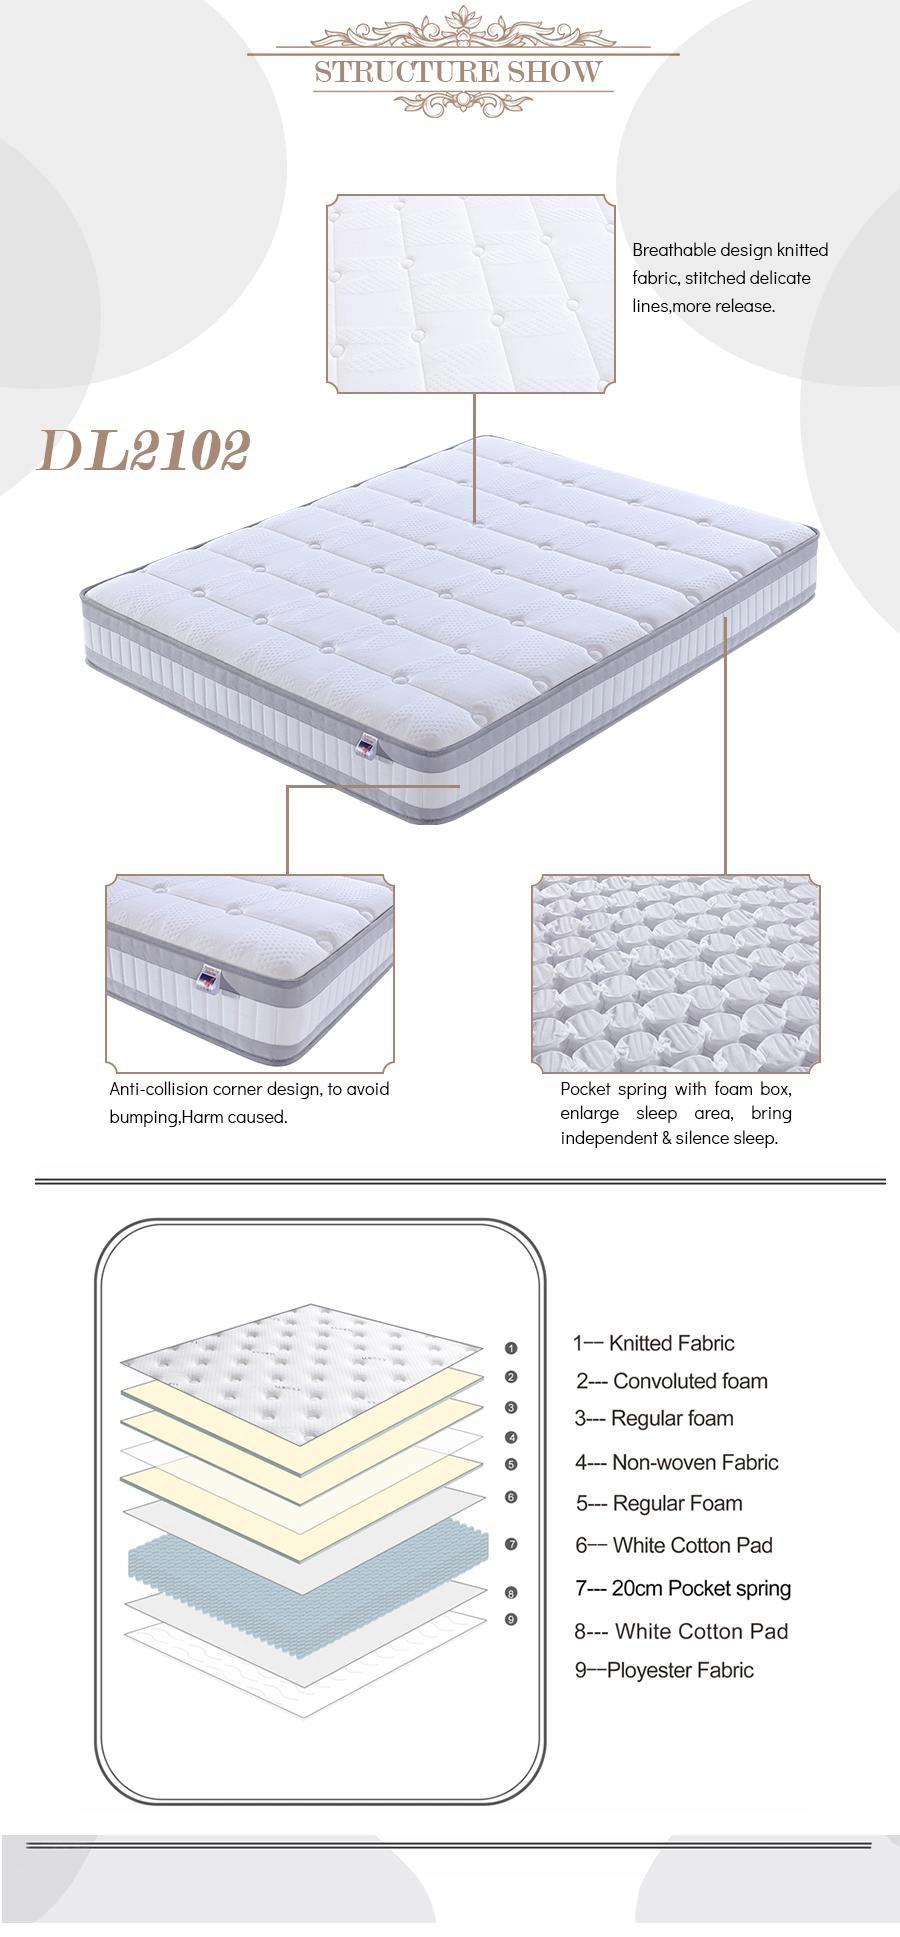 Popular, Cozy, Durable, Foldable, Stylish Foam Dreamleader/OEM Compress and Roll in Carton Box Bed Mattress